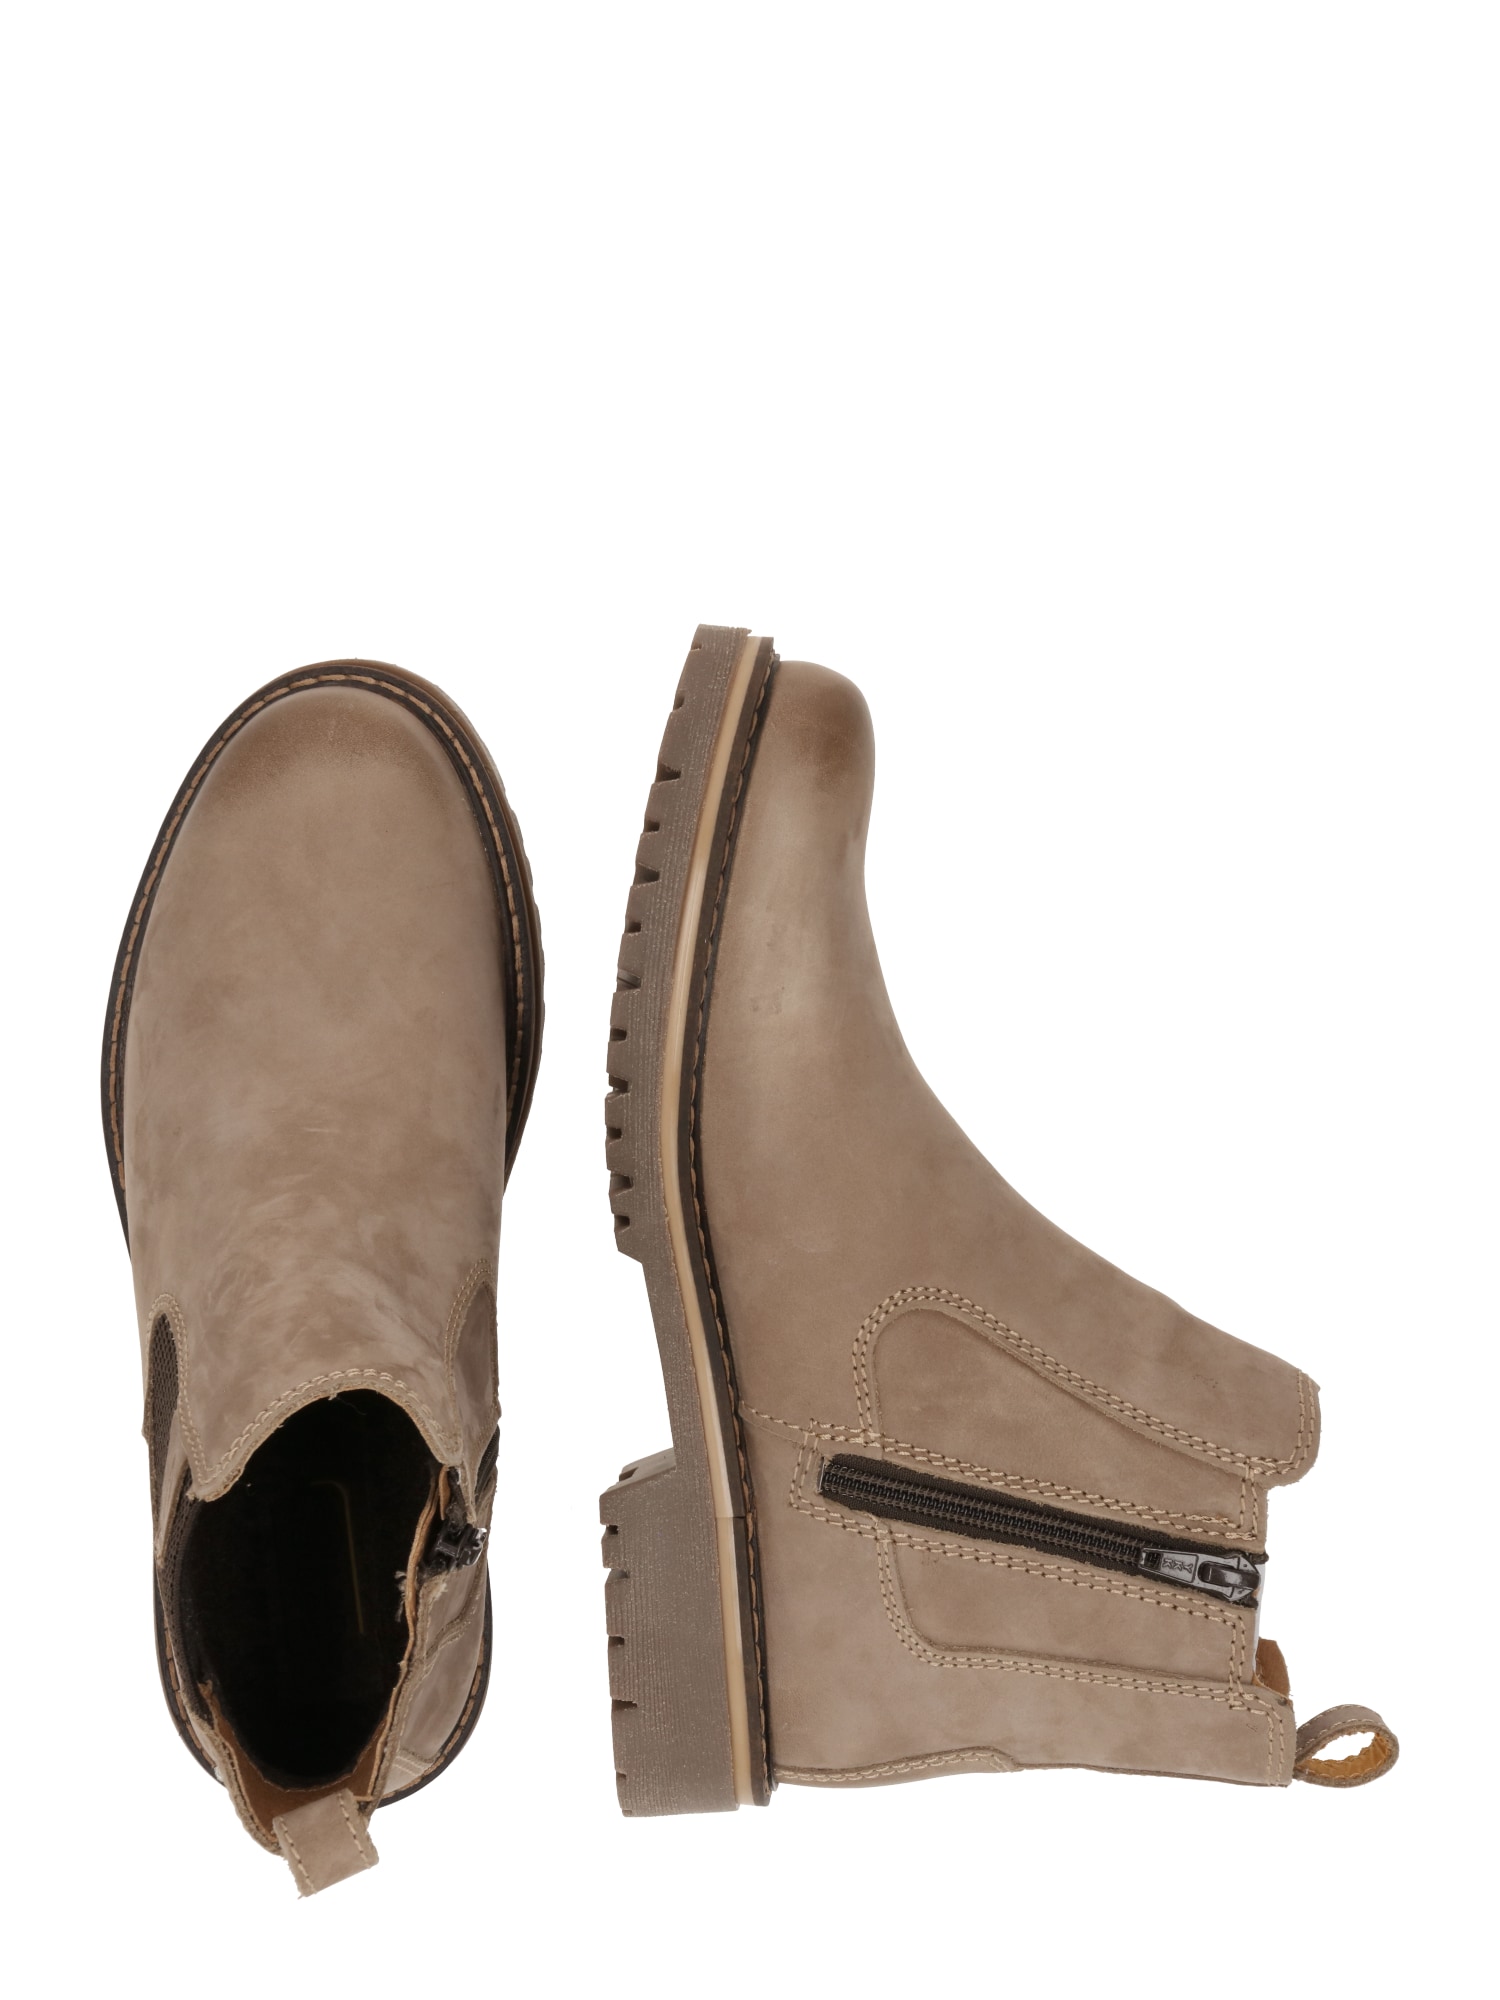 camel active Chelsea boots